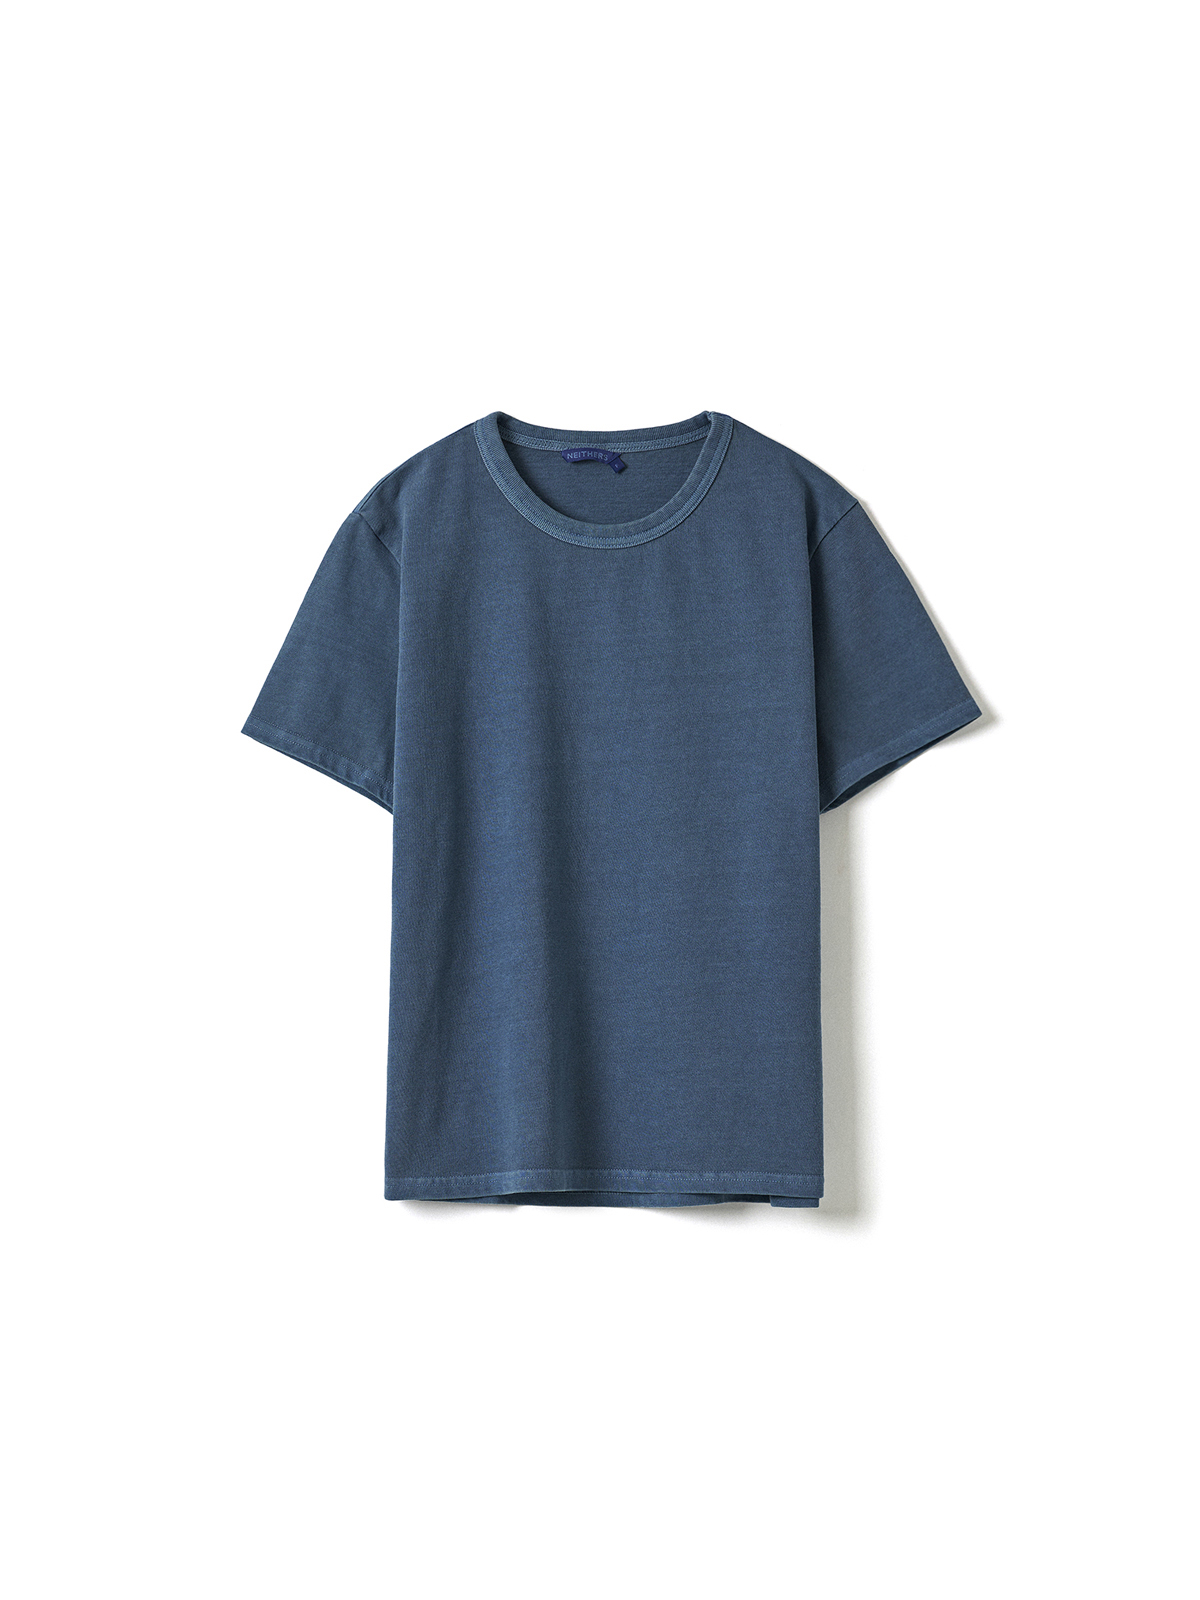 GARMENT DYED T- FOR WOMEN (HEATHER NAVY)